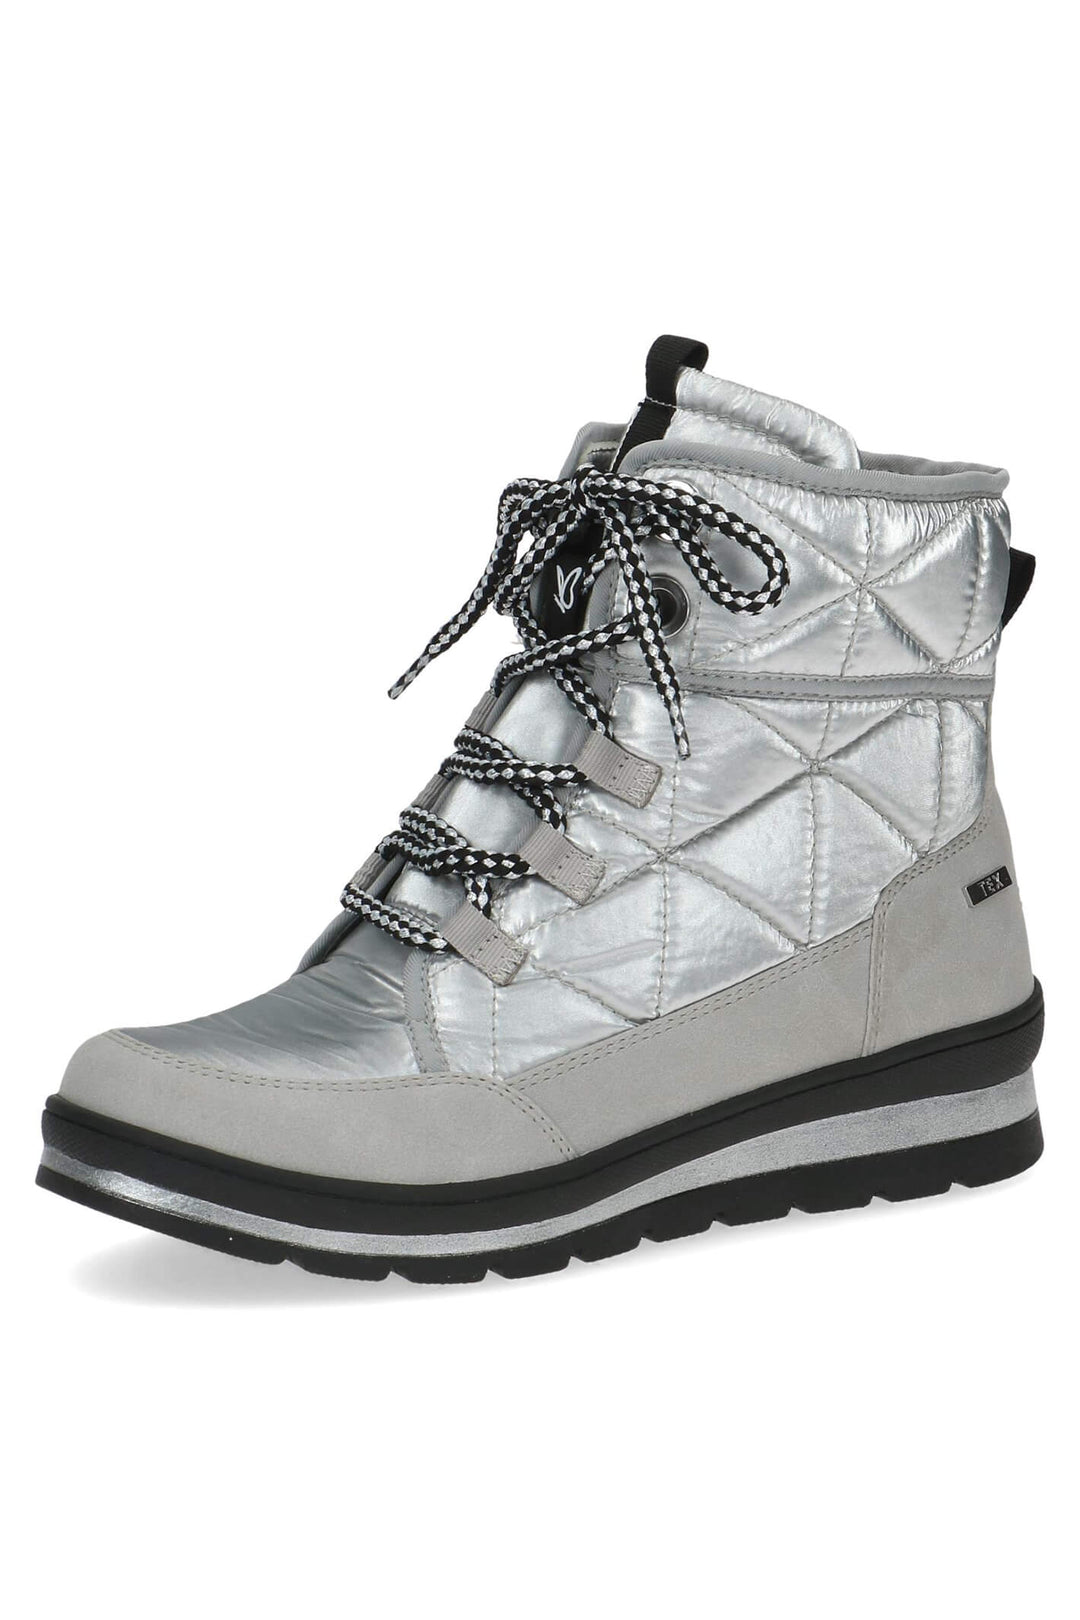 Caprice Holy 26209 Silver Waterproof Snow Boots - Experience Boutique